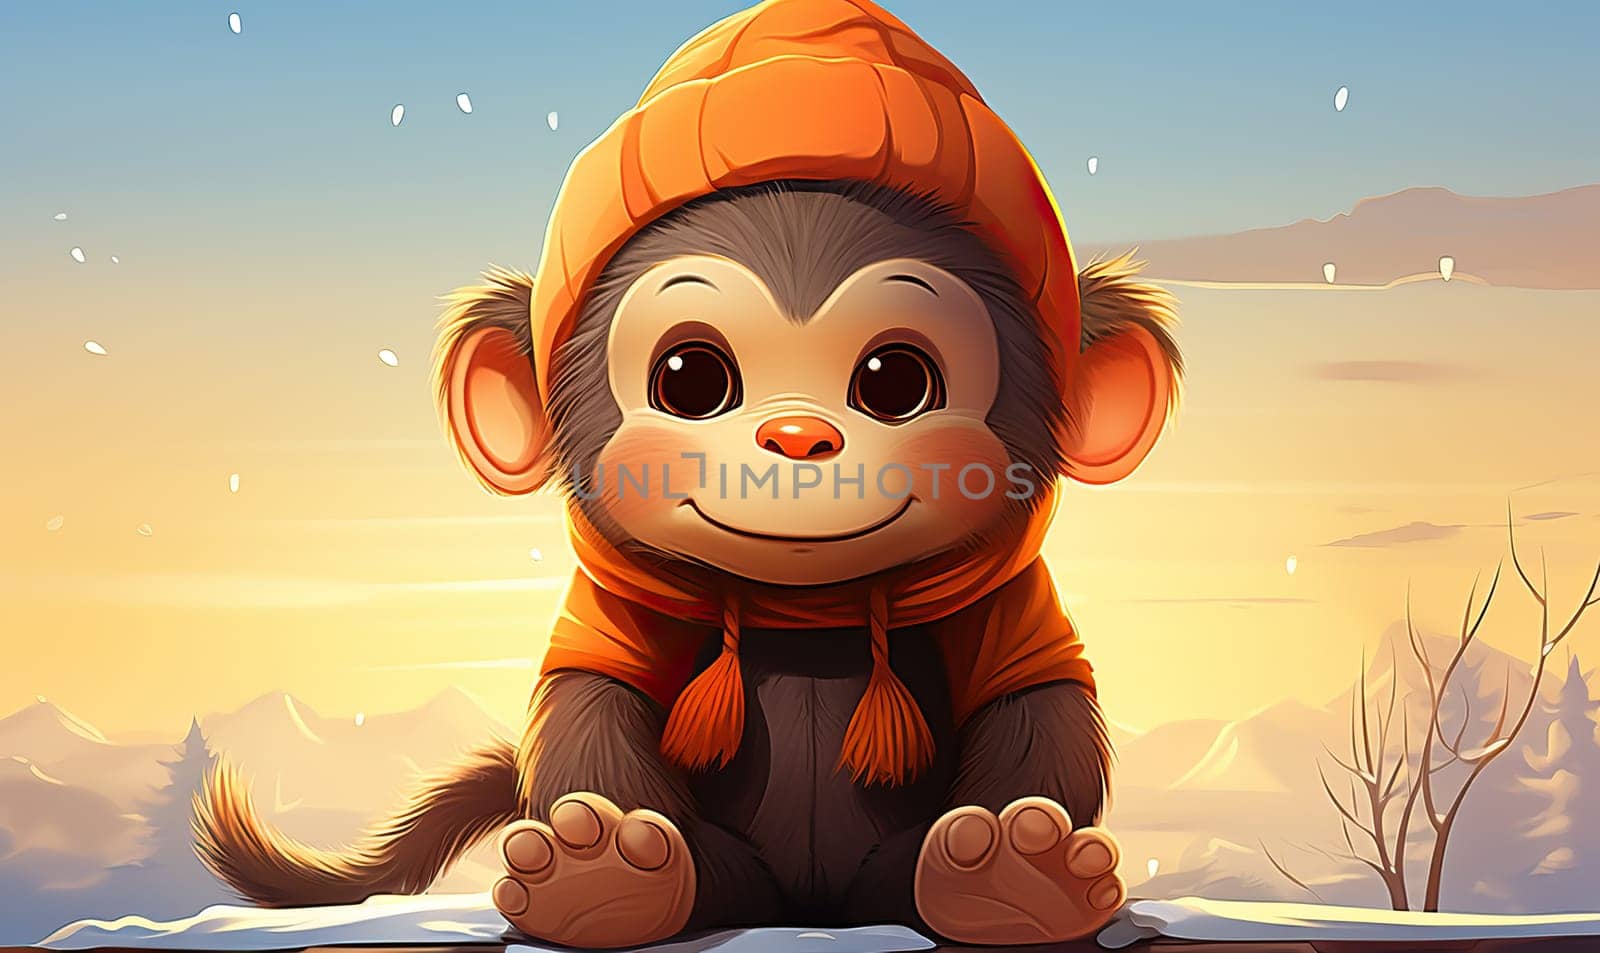 Cartoon animal monkey on a natural background. Selective soft focus.